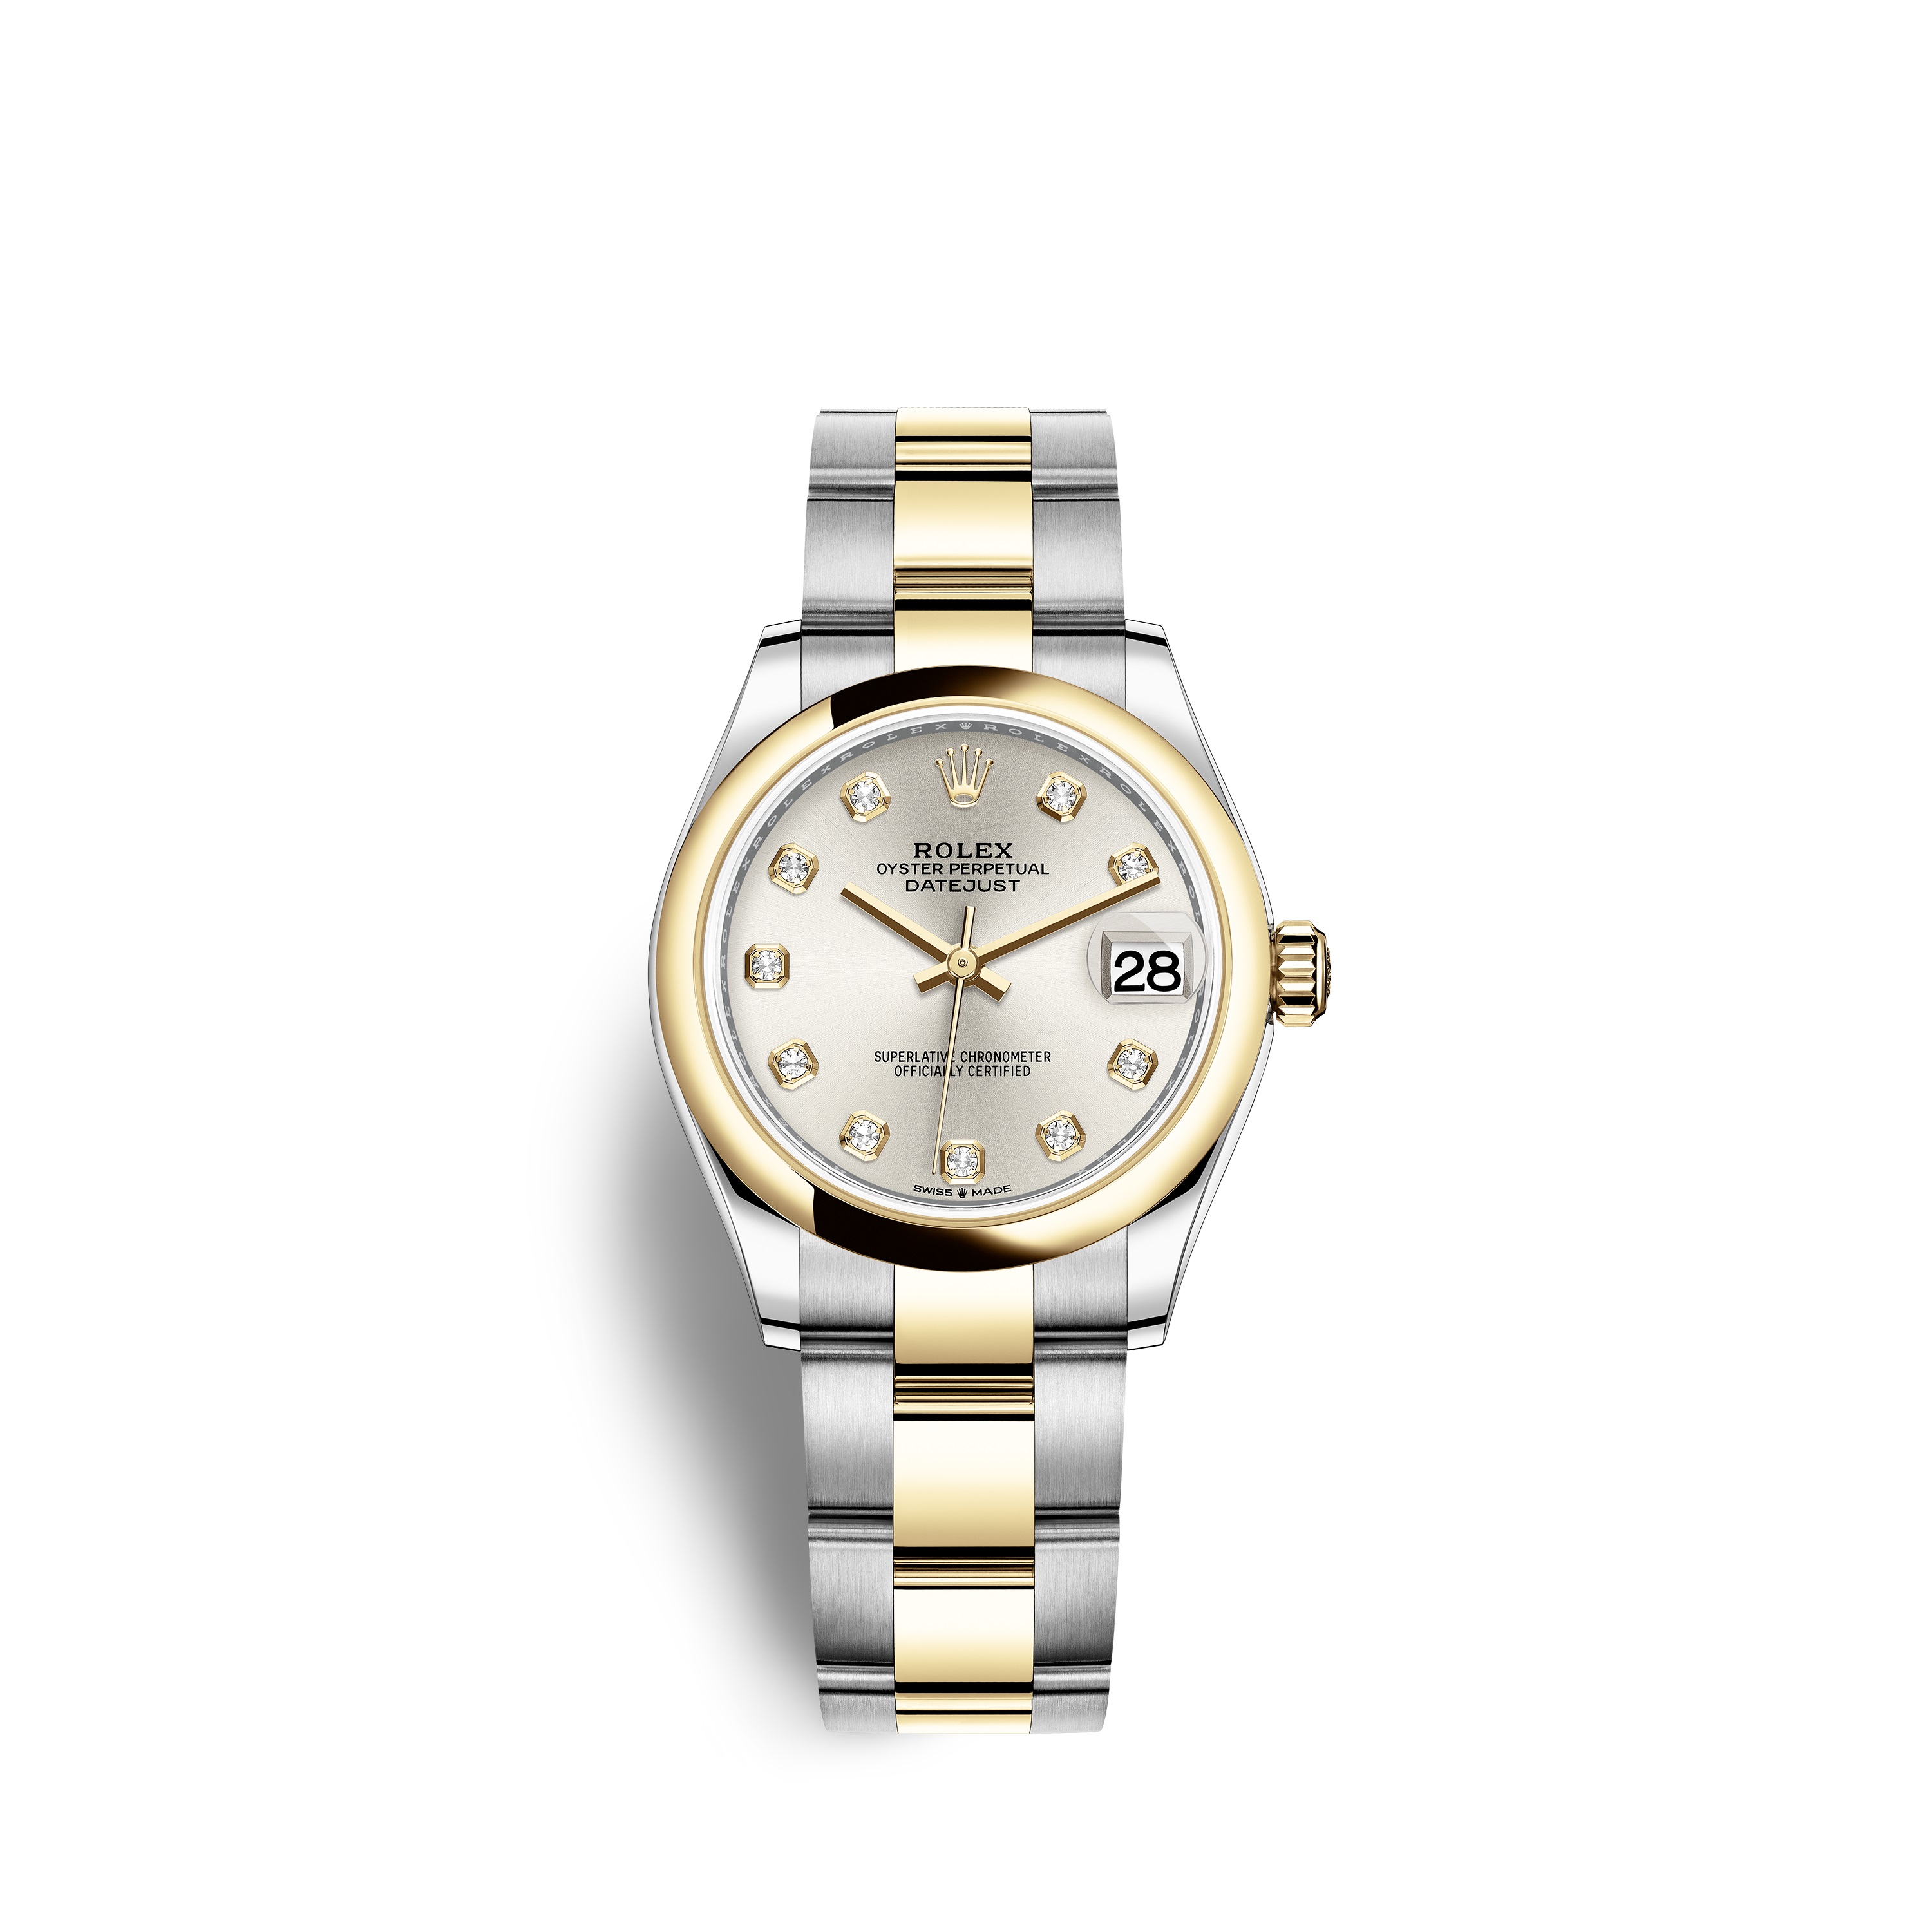 Datejust 31 278243 Gold & Stainless Watch (Silver Set with Diamonds)